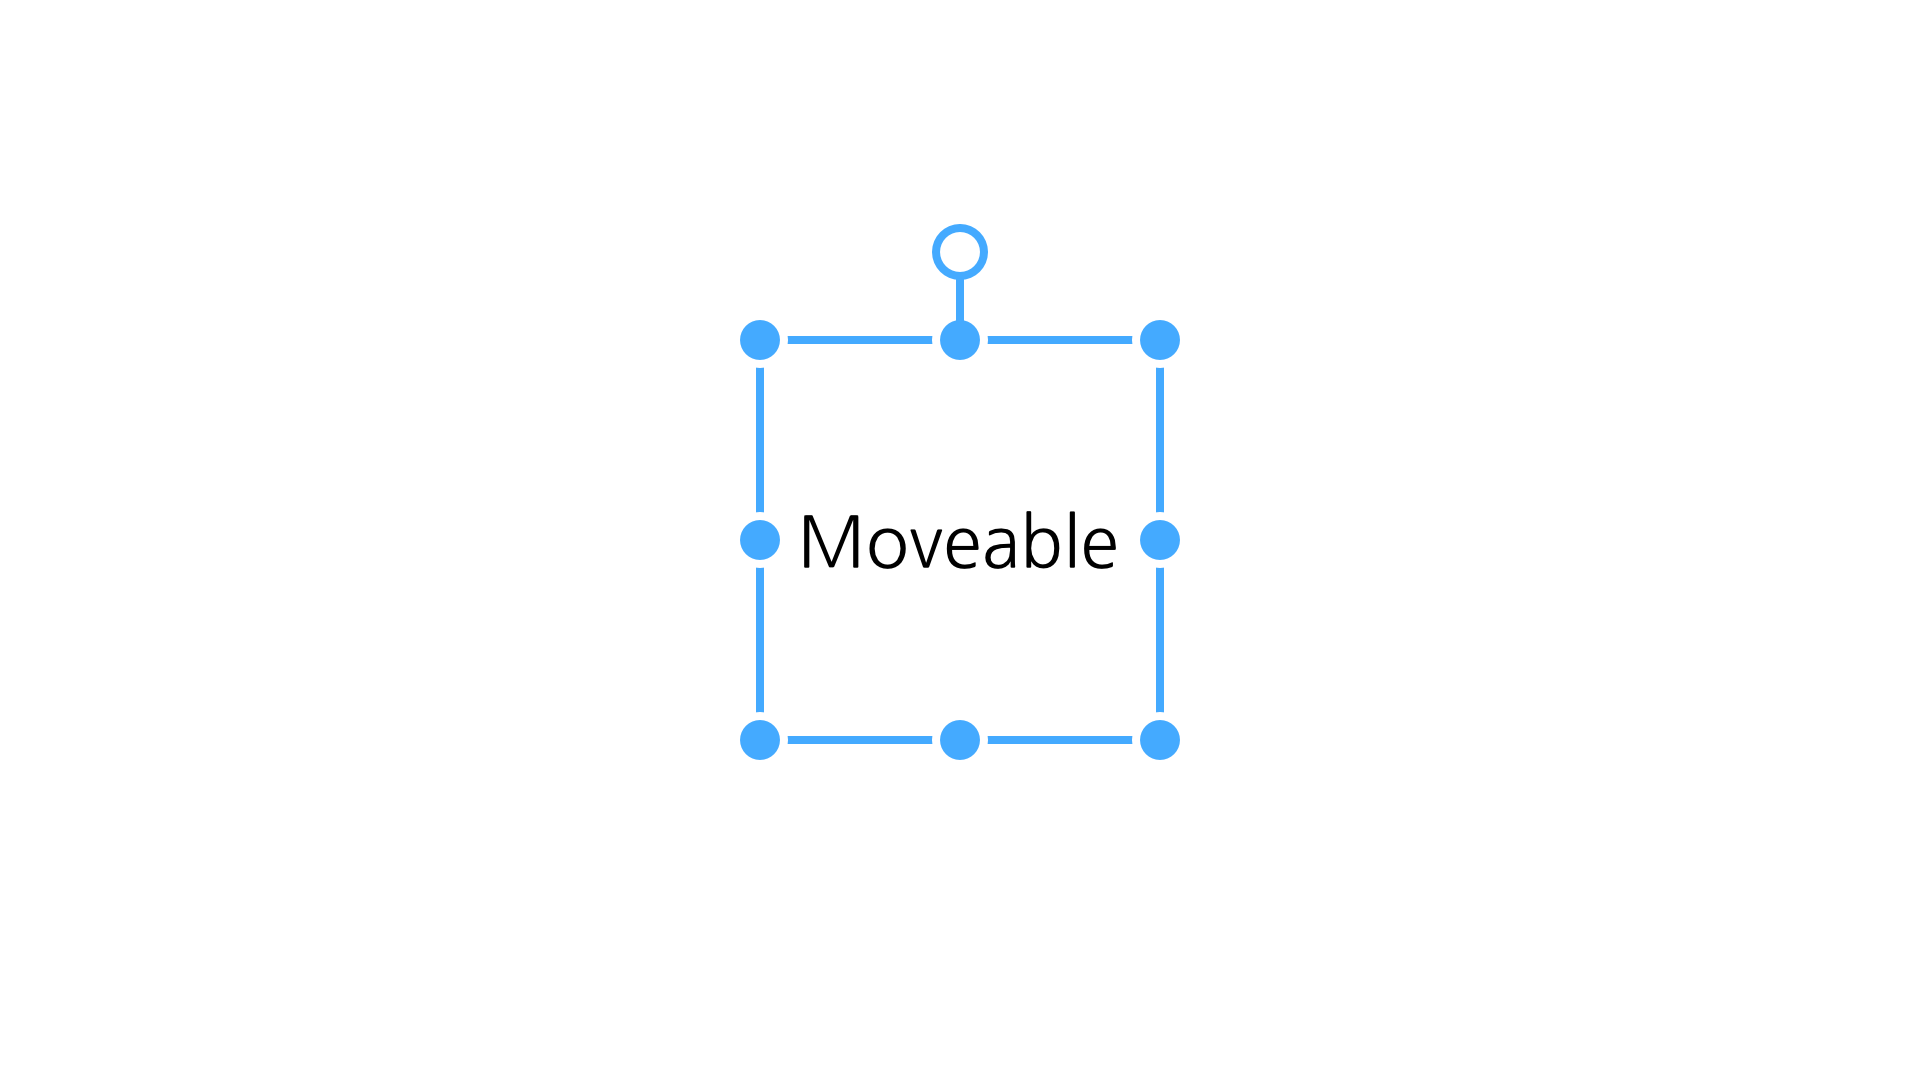 moveable